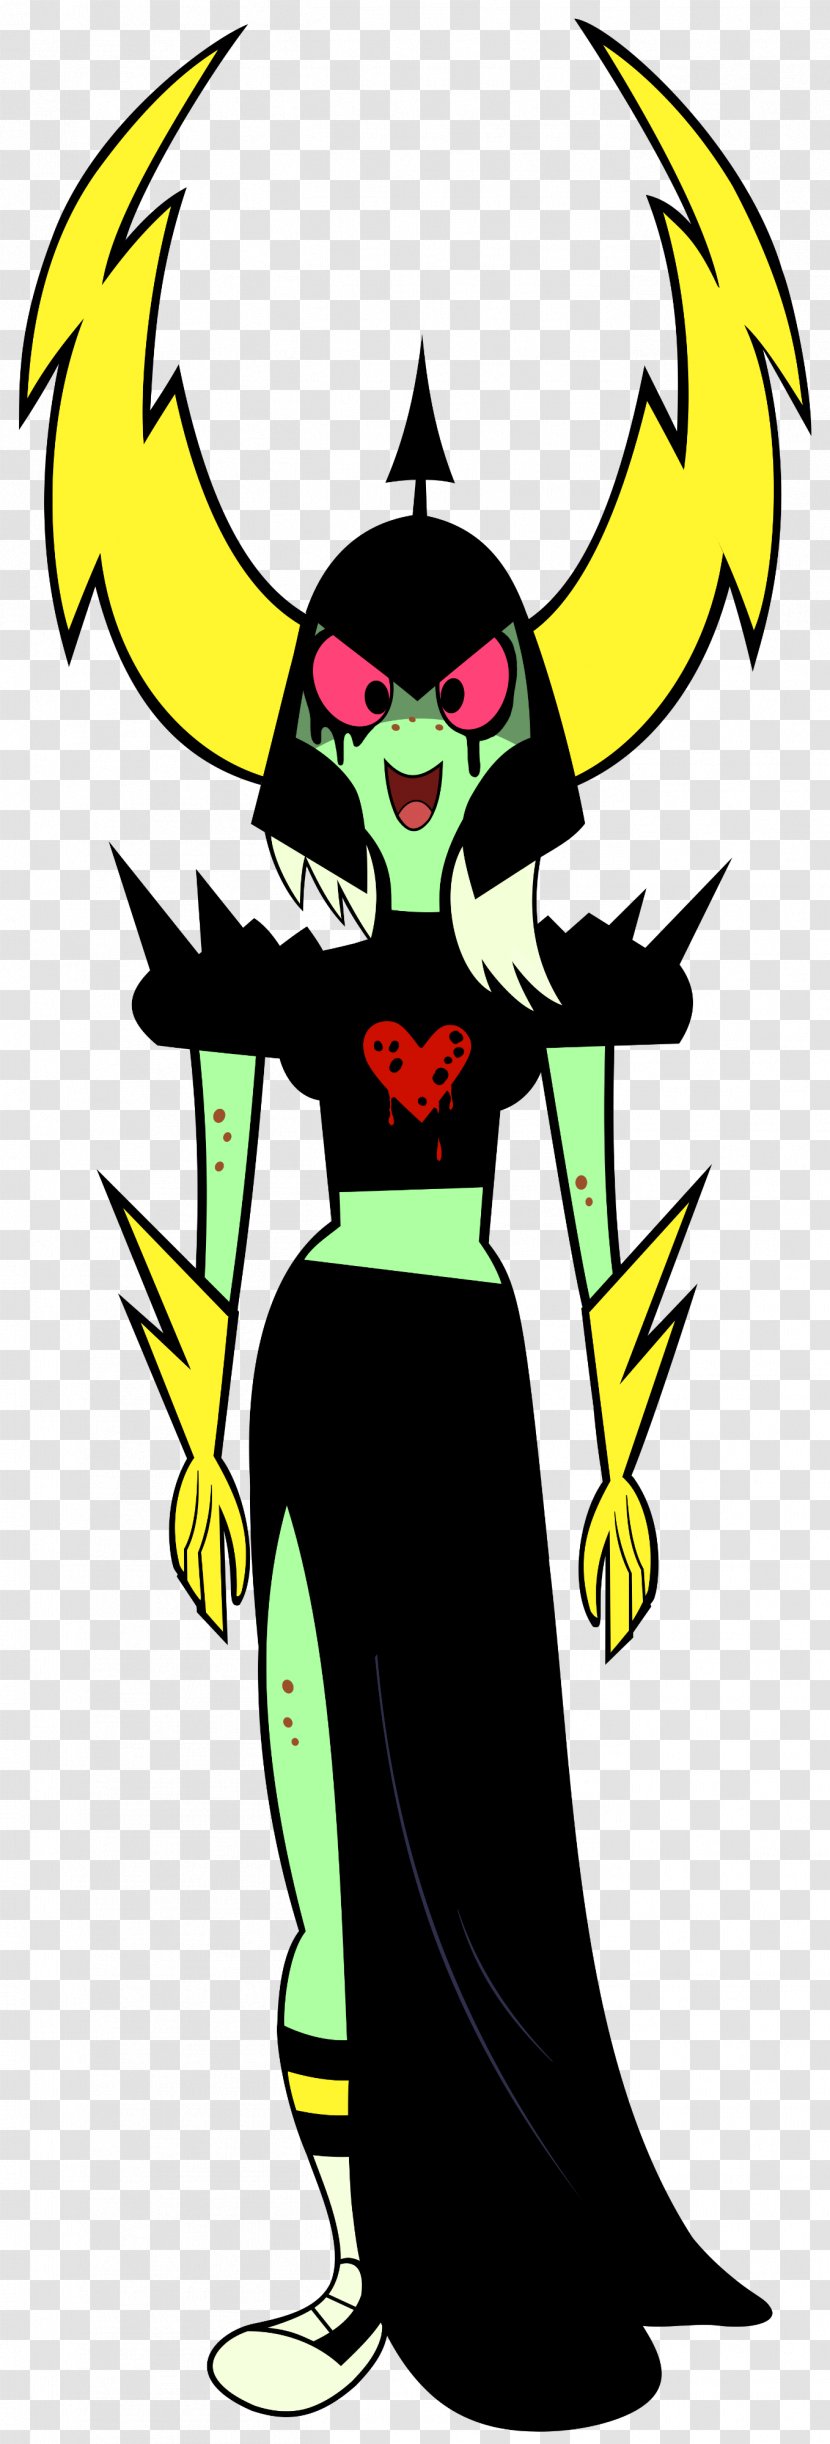 Lord Hater Commander Peepers Villain Disney XD Wikia Transparent PNG